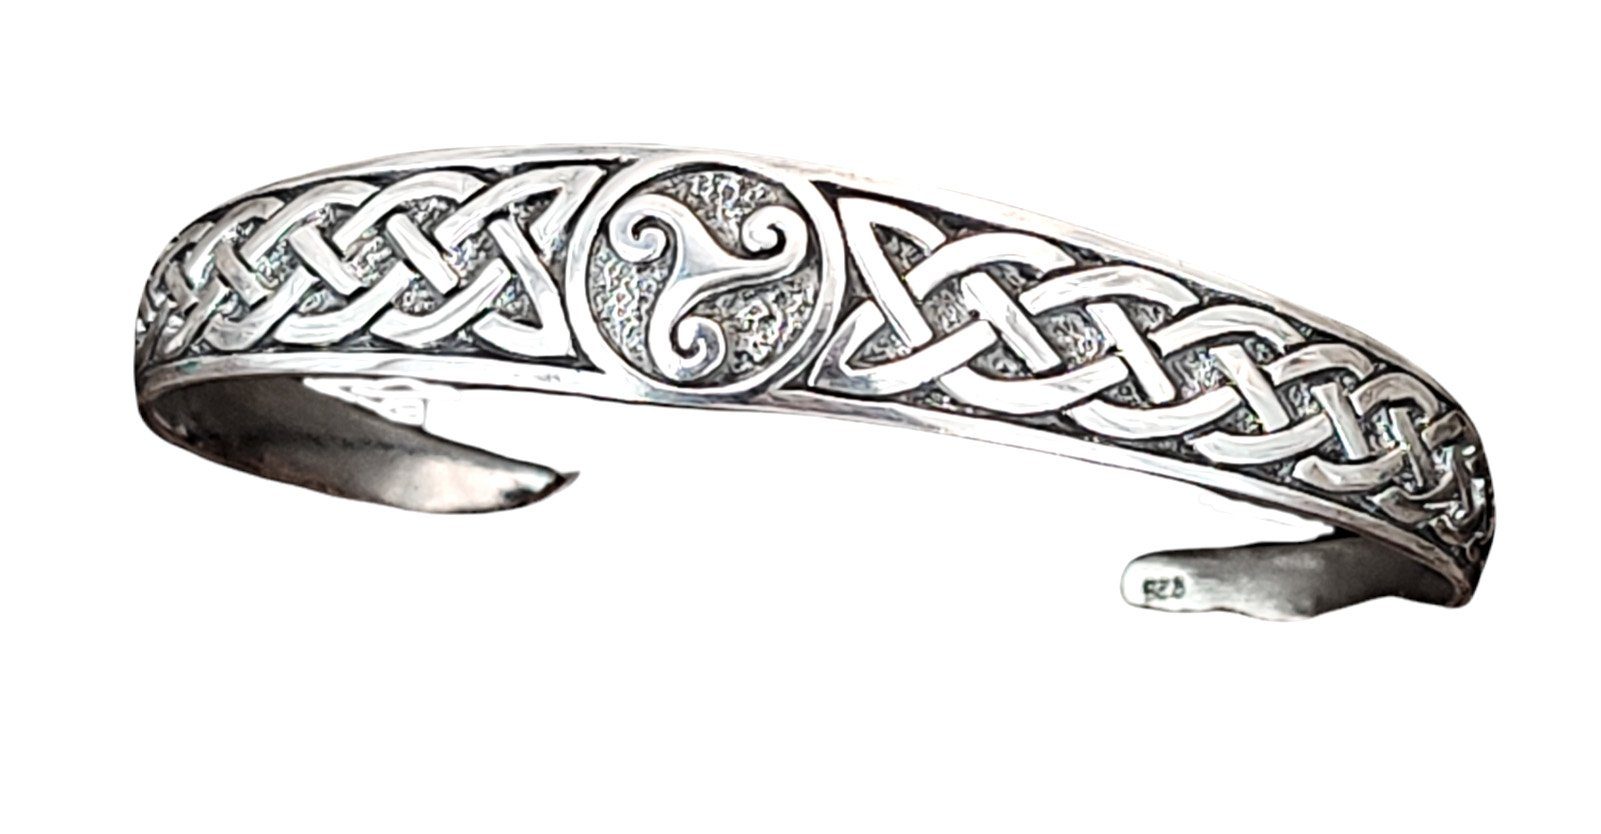 Armband ABTris Triskele of Armreif 925 Leather Knotenmuster Silberarmband Sterling Silber Kiss